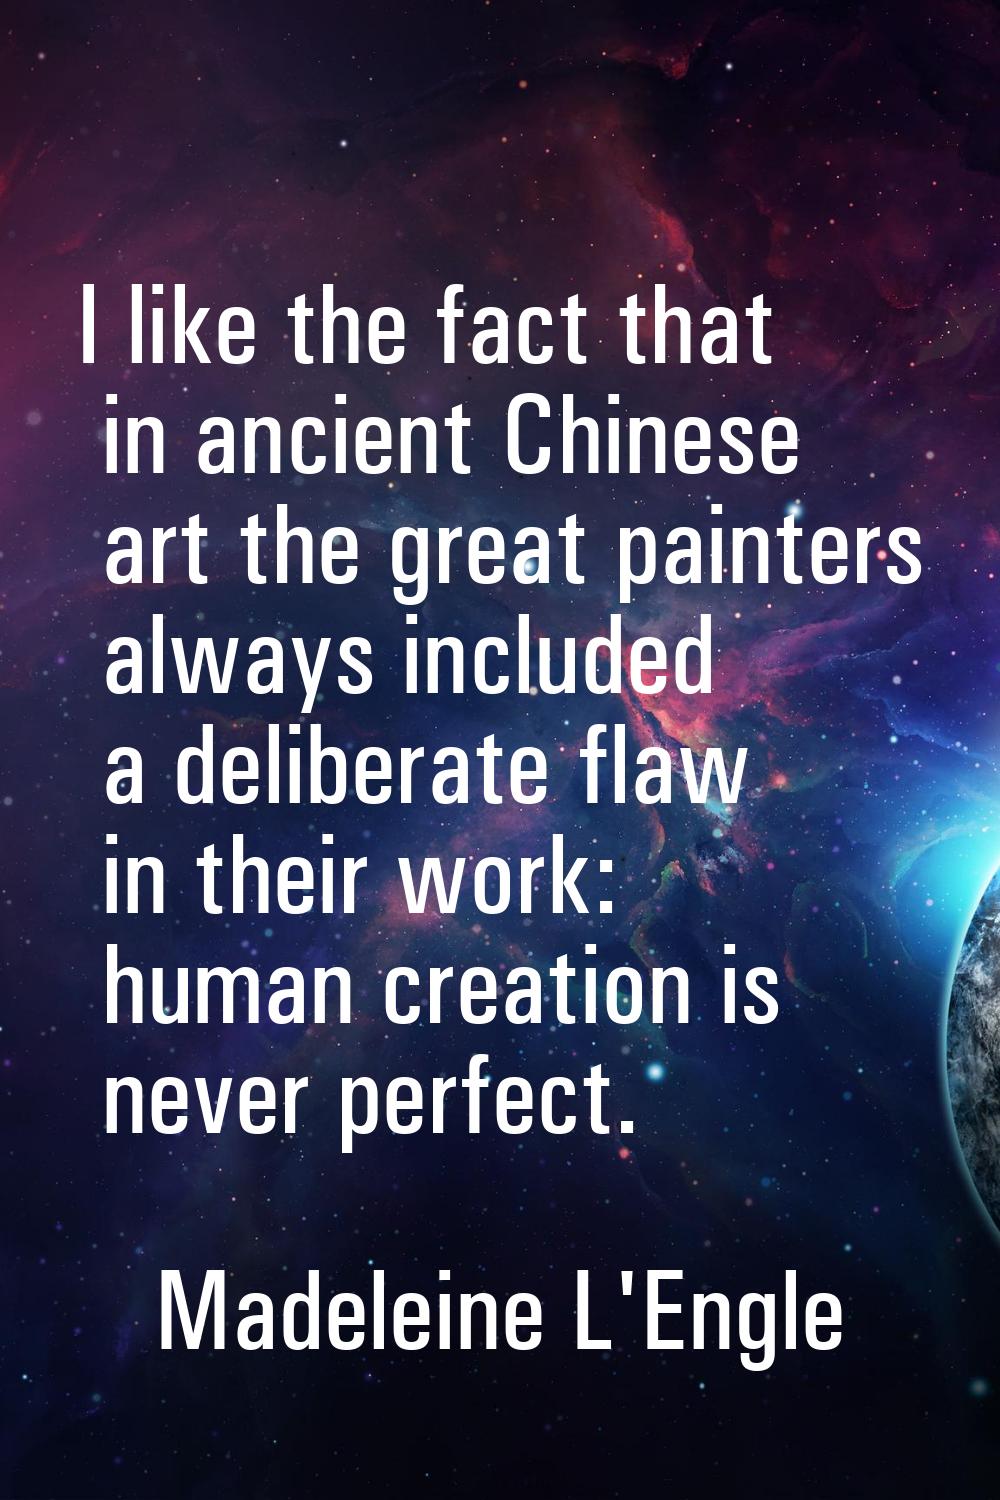 I like the fact that in ancient Chinese art the great painters always included a deliberate flaw in